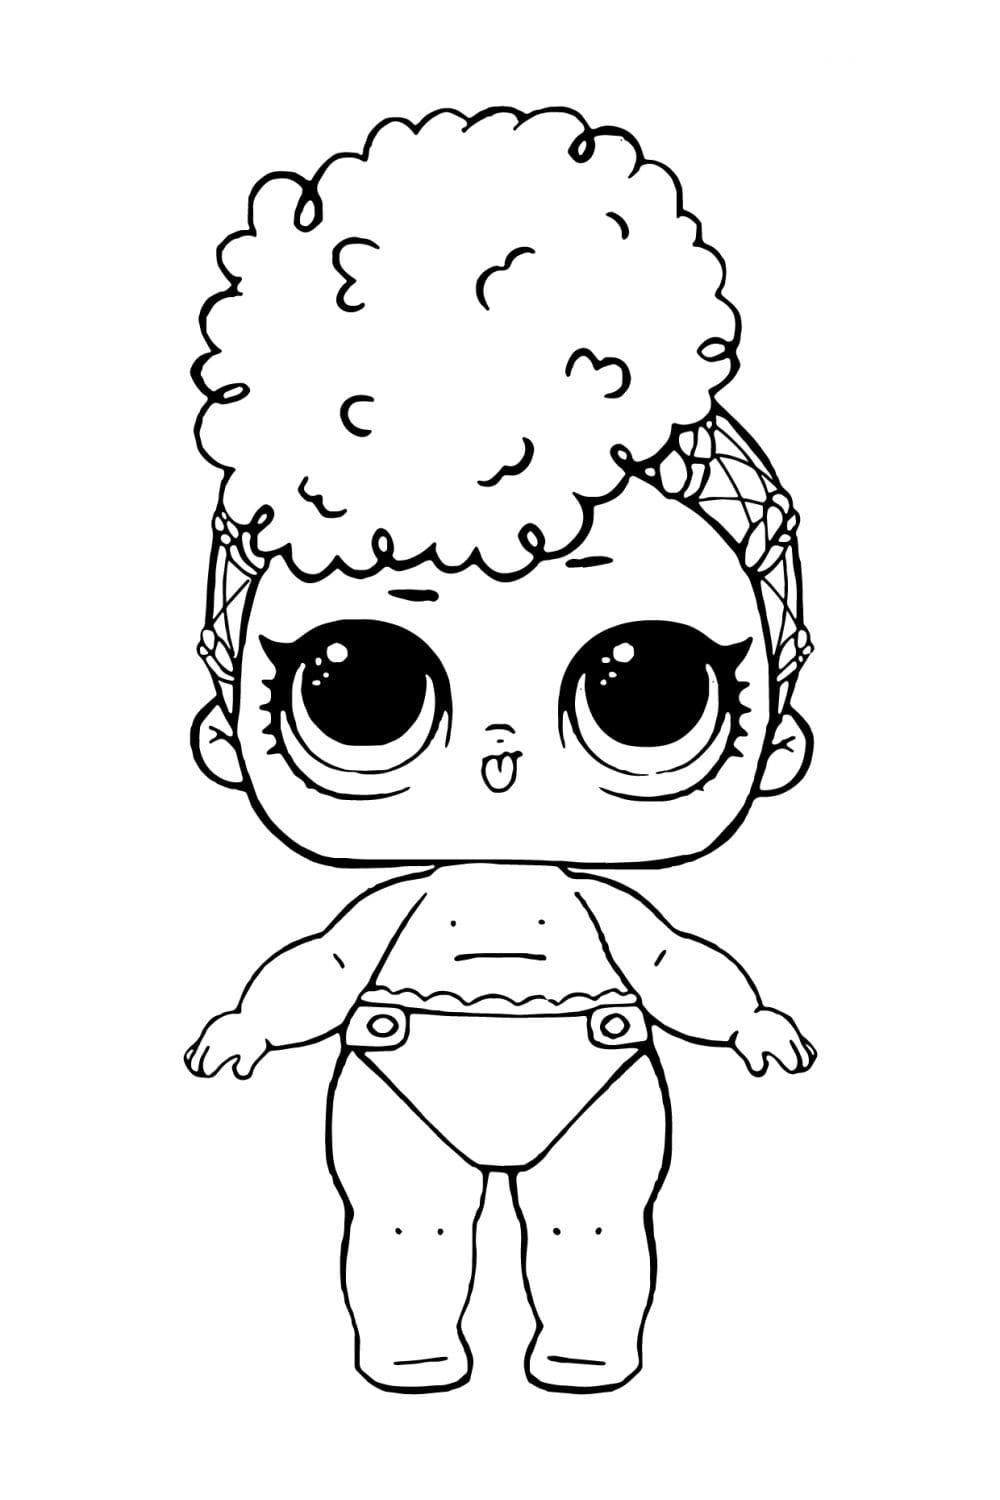 LOL Baby Coloring Pages   Free Printable Coloring Pages for Kids